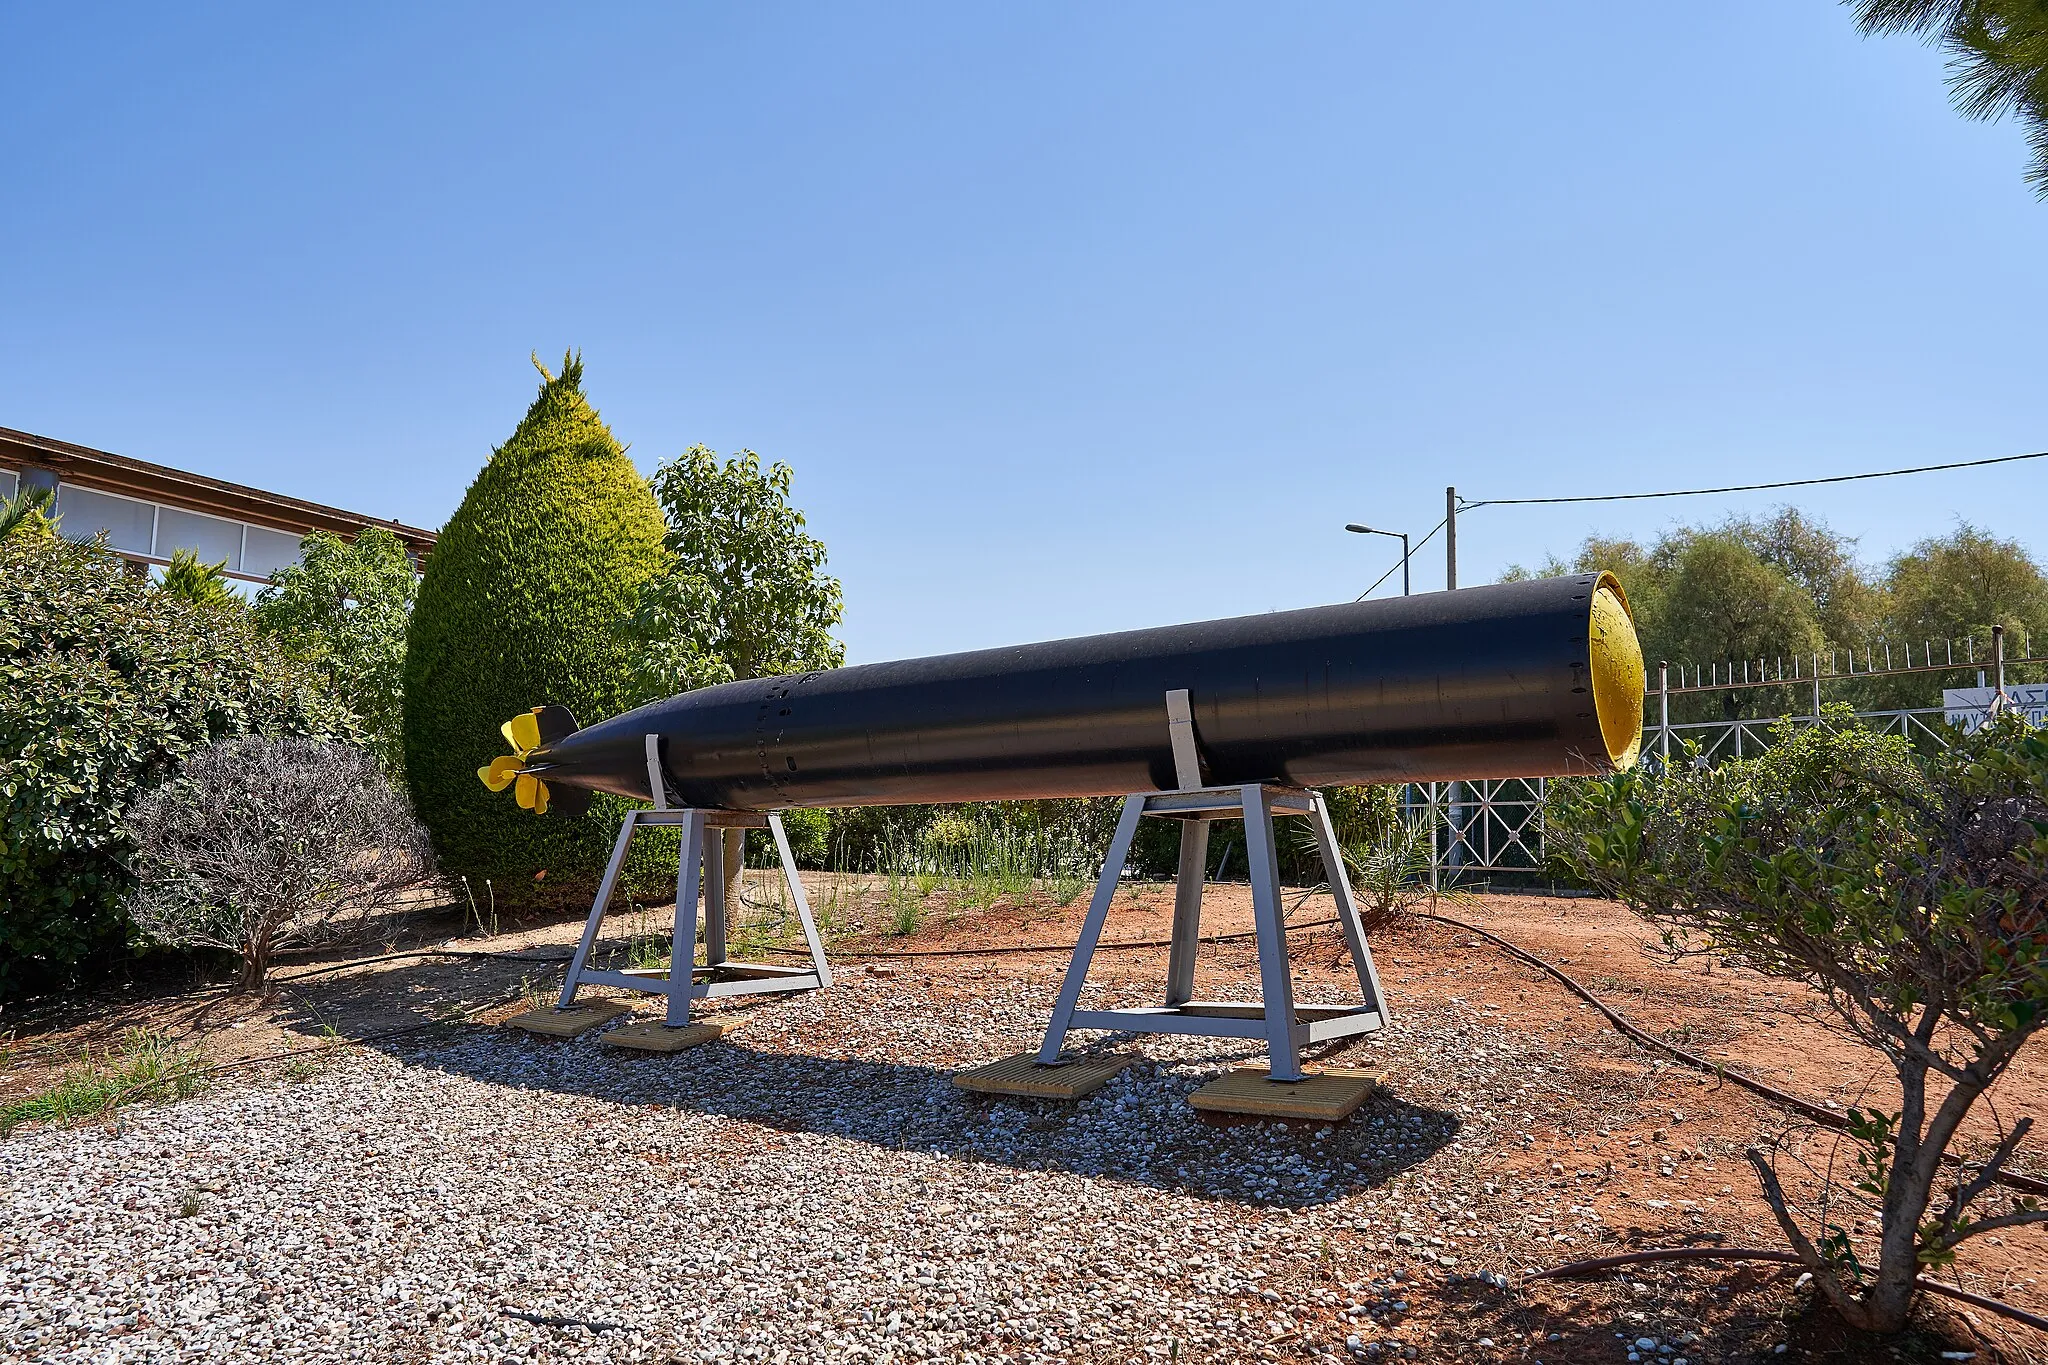 Photo showing: A torpedo exhibited at the Park of Maritime Tradition on September 1, 2020